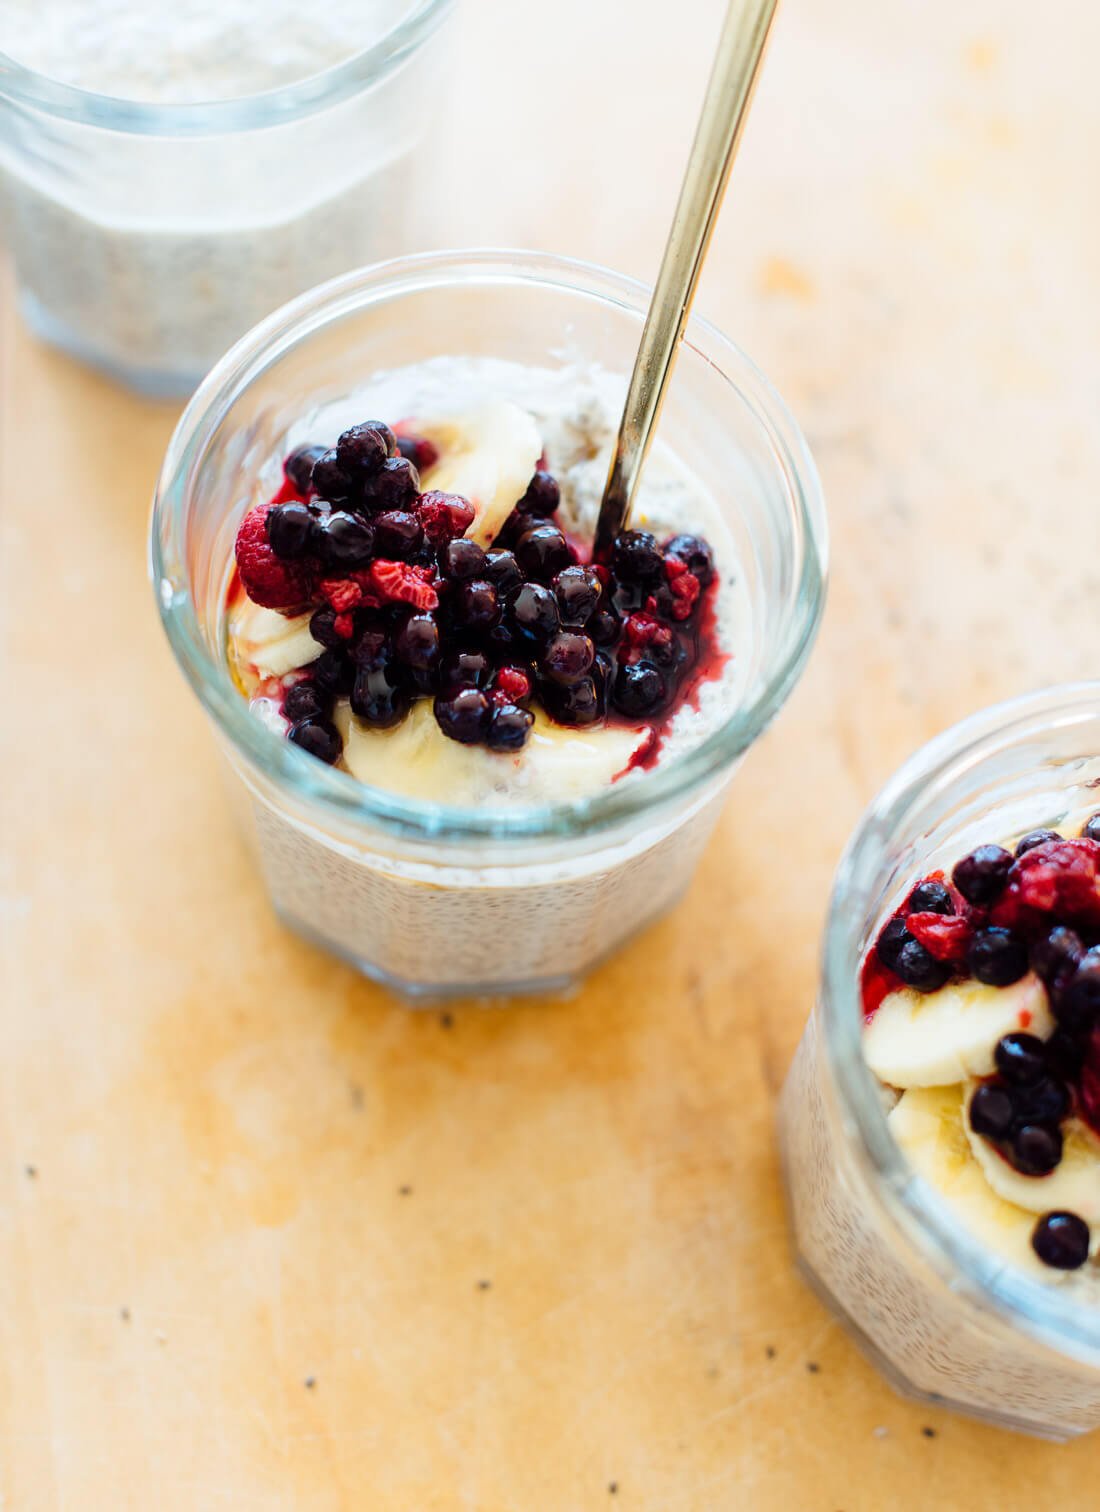 Ultra creamy vanilla-orange chia seed pudding is a nutritious and delicious breakfast or snack. Gluten free and easily vegan. cookieandkate.com